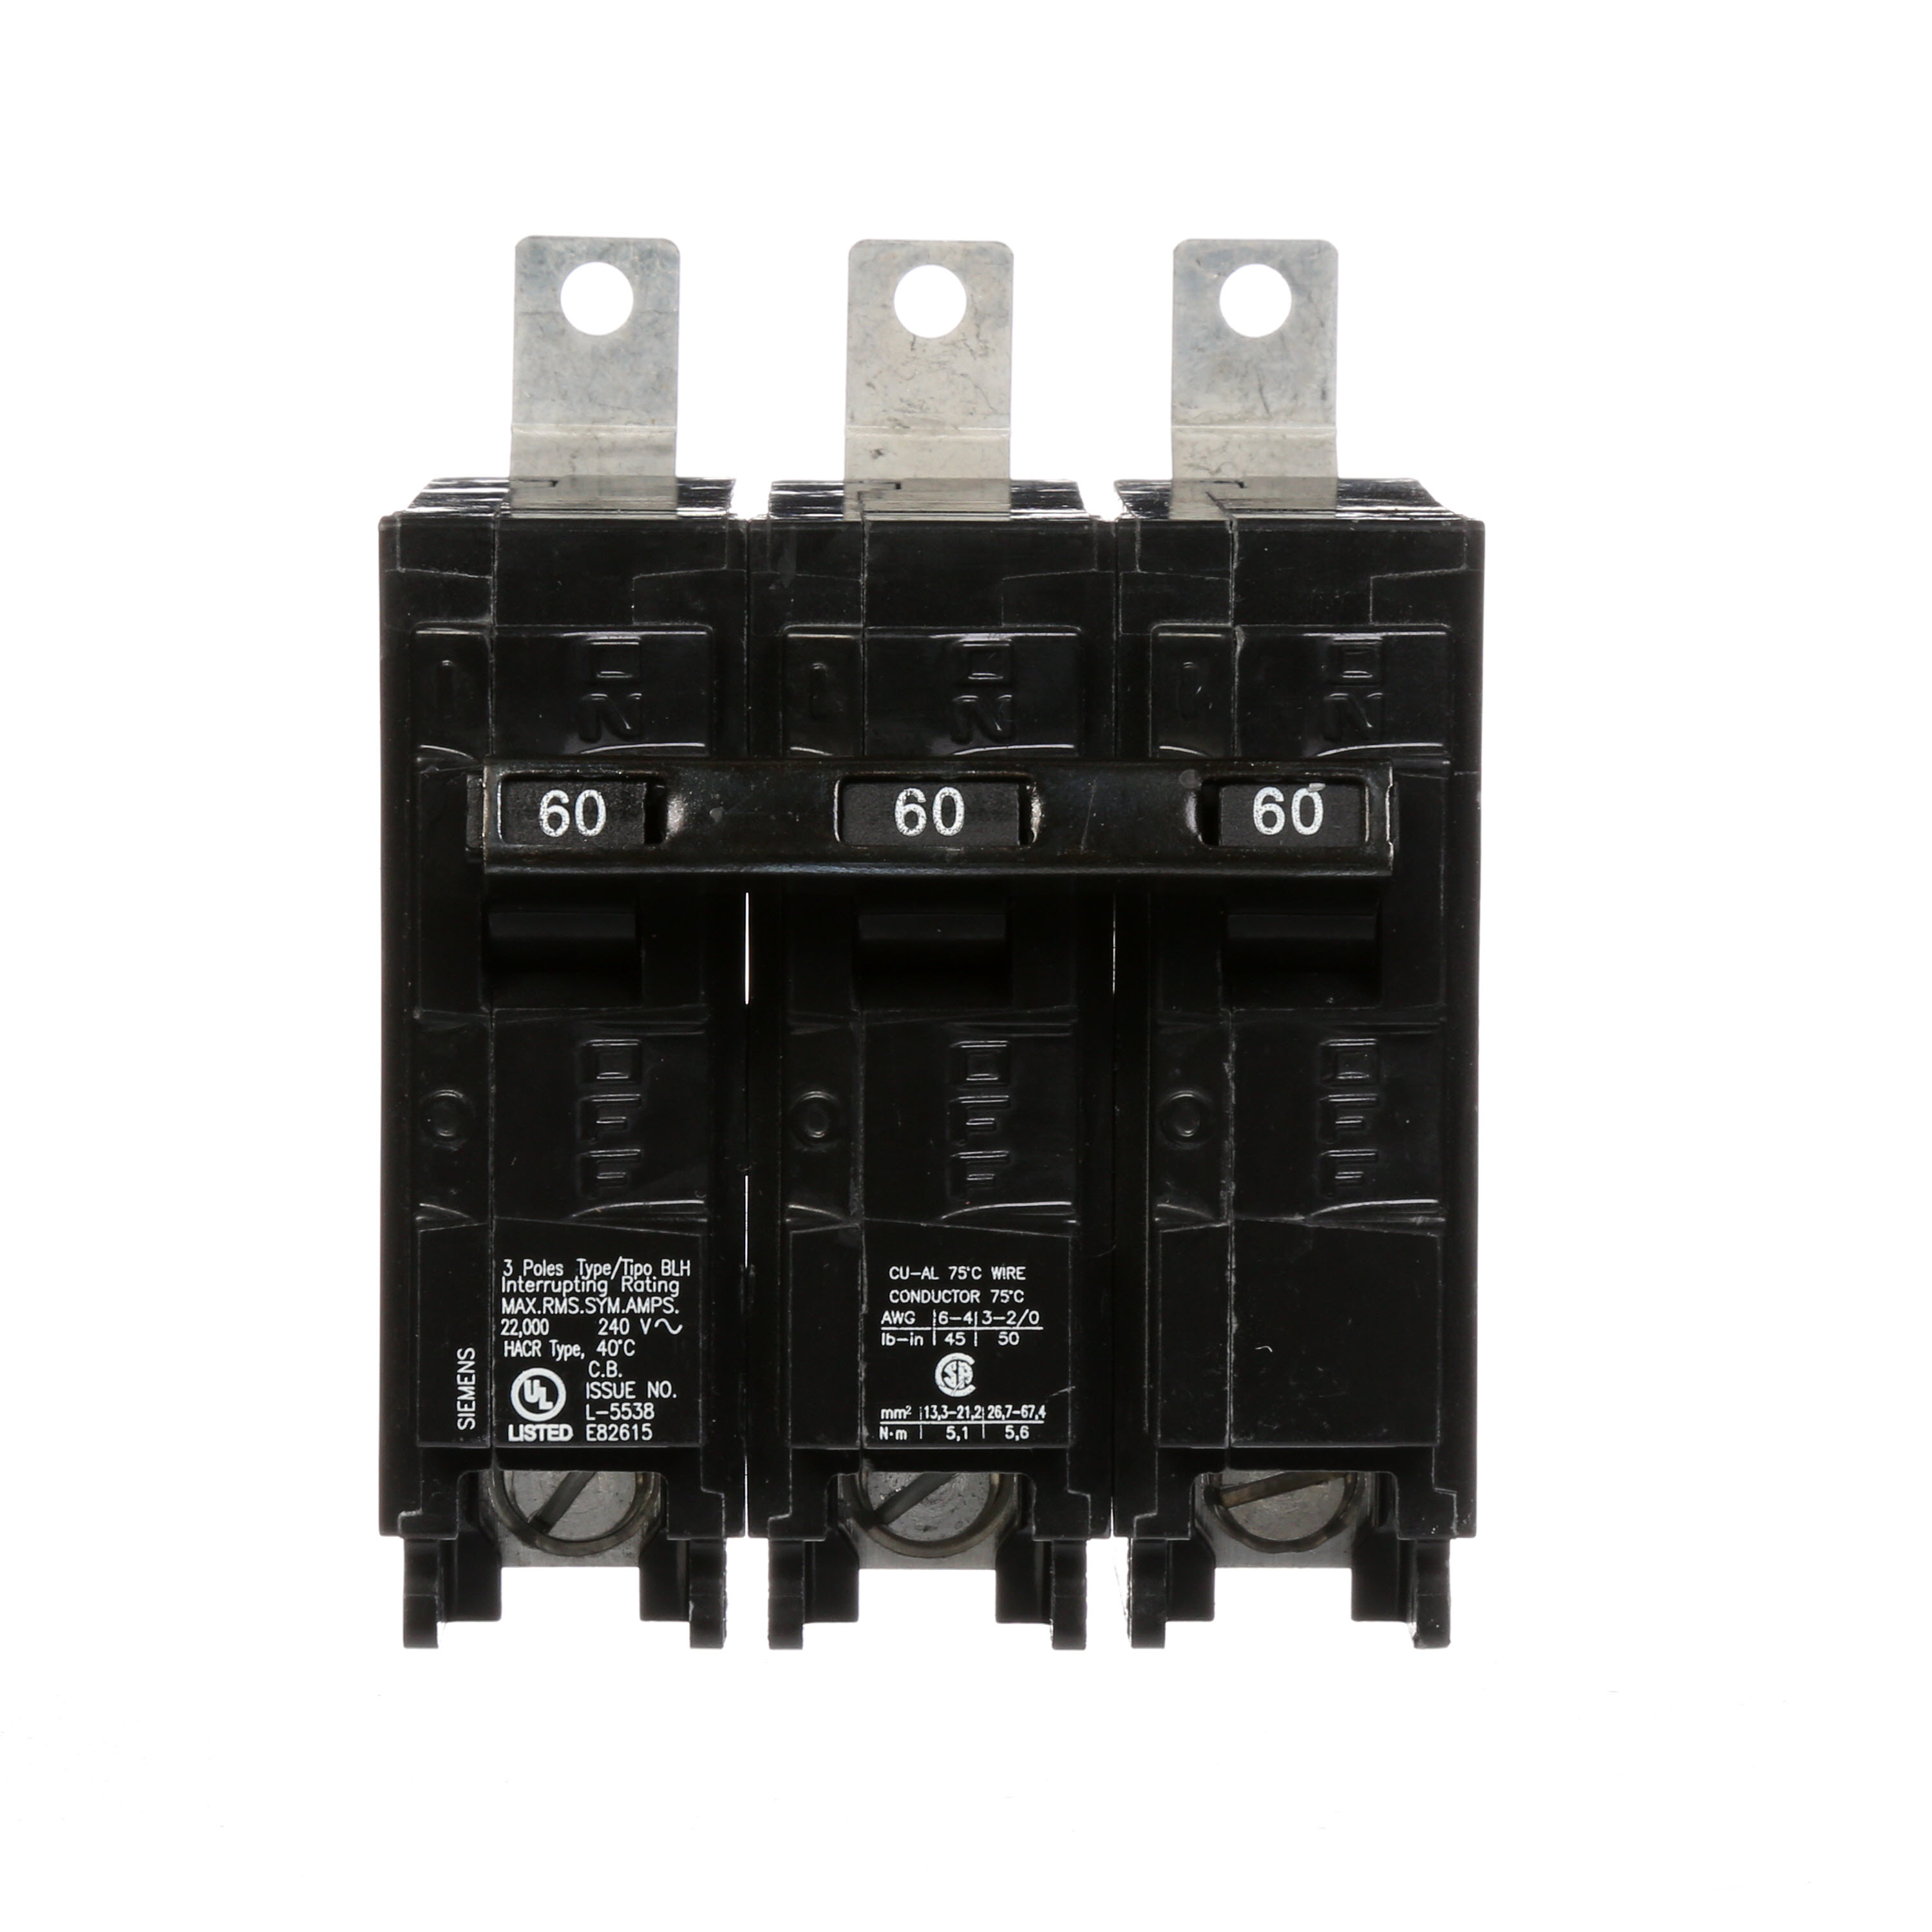 Siemens Low Voltage Molded Case Circuit Breakers Panelboard Mounting 240V Circuit Breakers - Type BL, 3-Pole, 240VAC are Circuit Protection Molded Case CircuitBreakers. BREAKER 60A 3P 240V 22K BLH